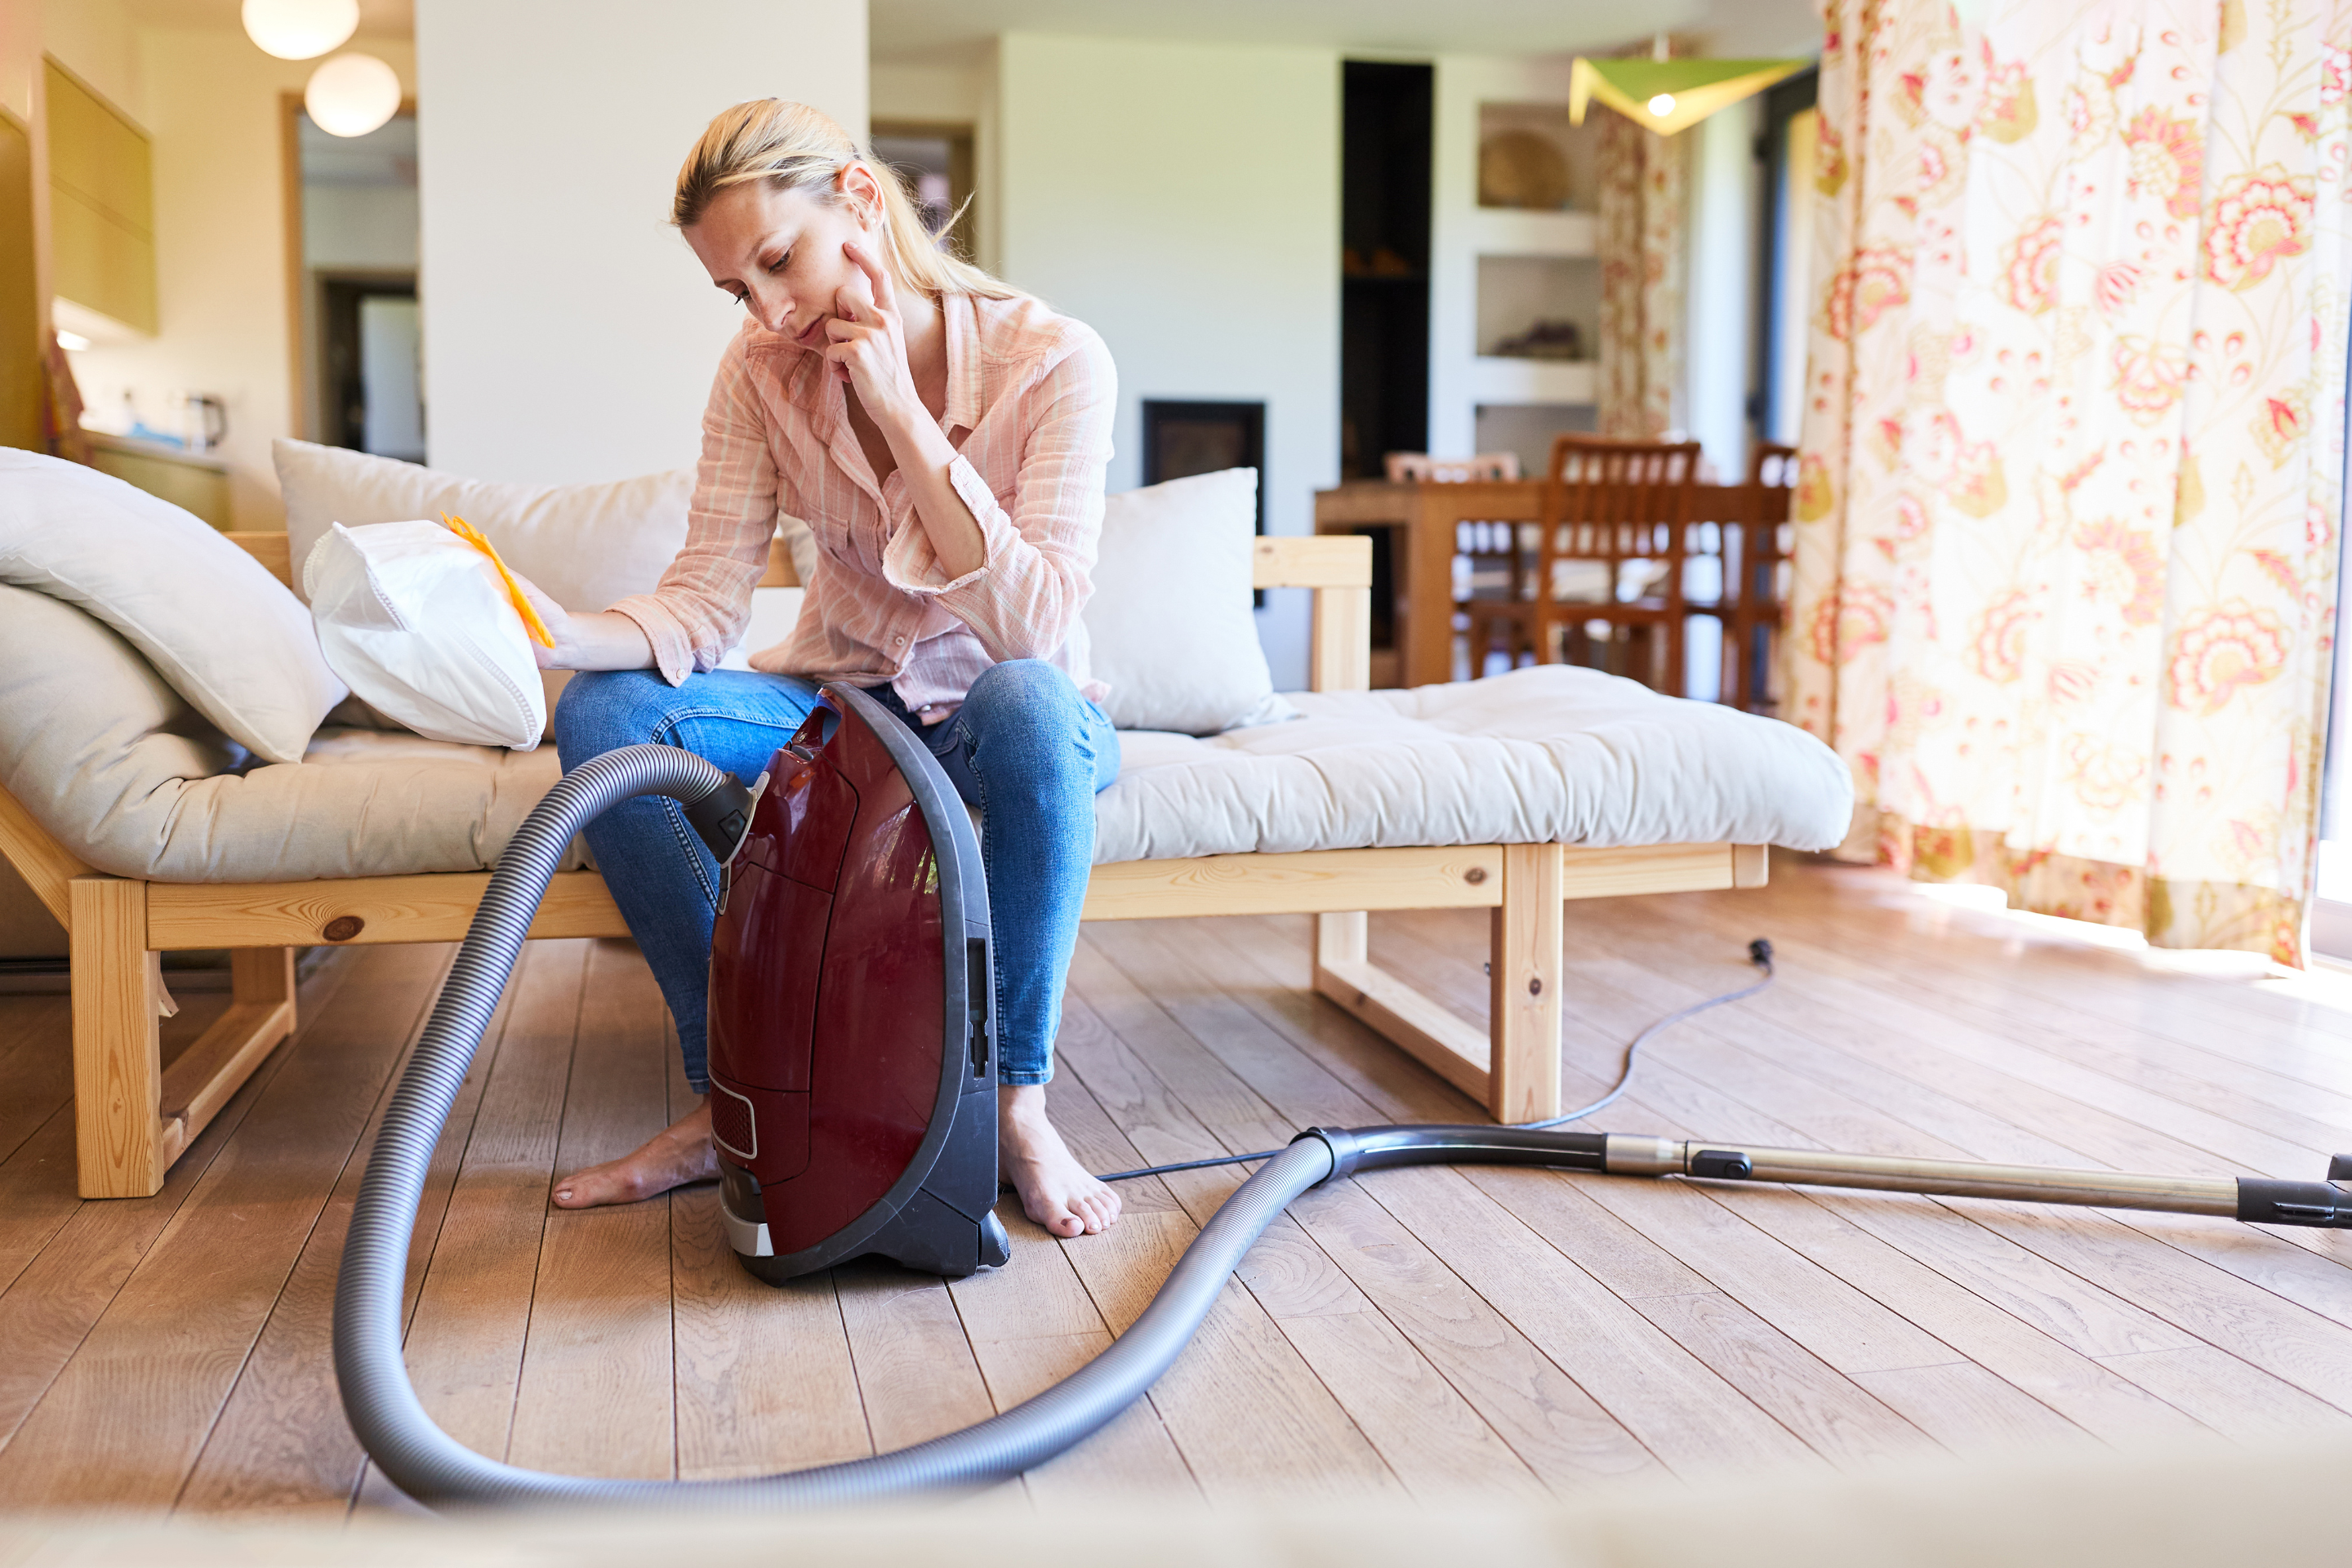 Apartment Living: How to Fix a Vacuum Cleaner With No Suction